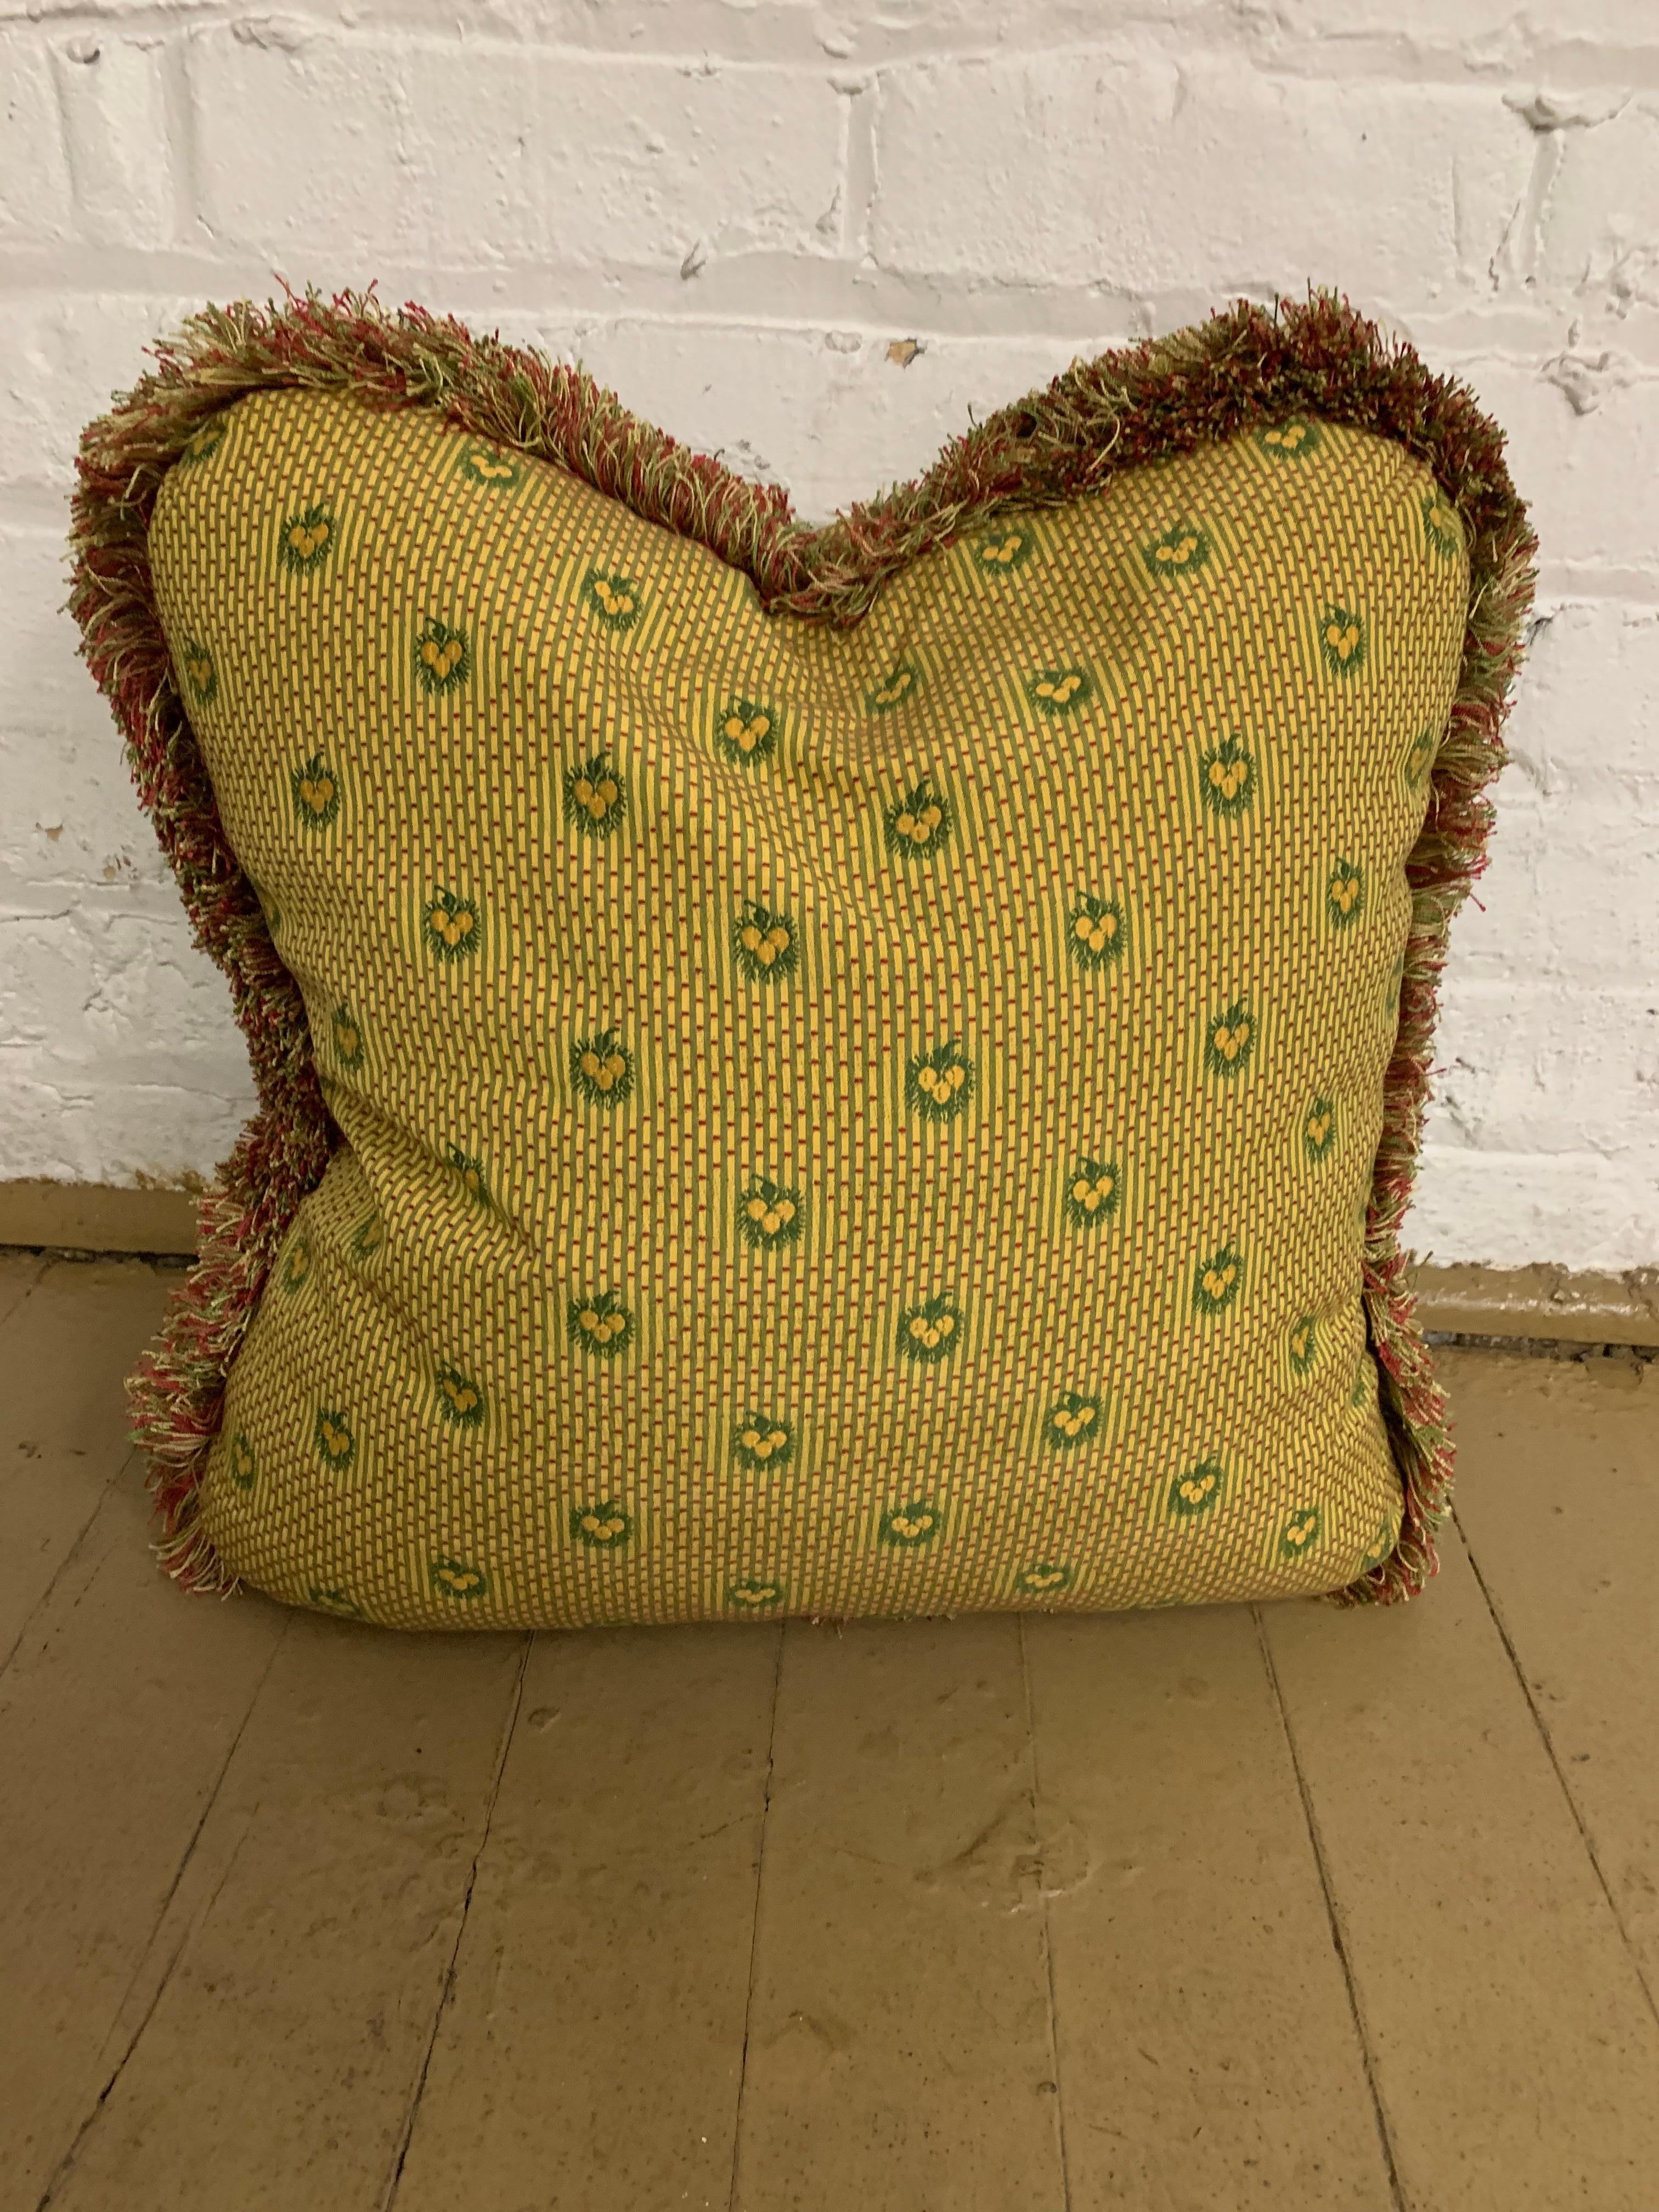 American Antique Handmade Pillows Gold and Green / a pair For Sale